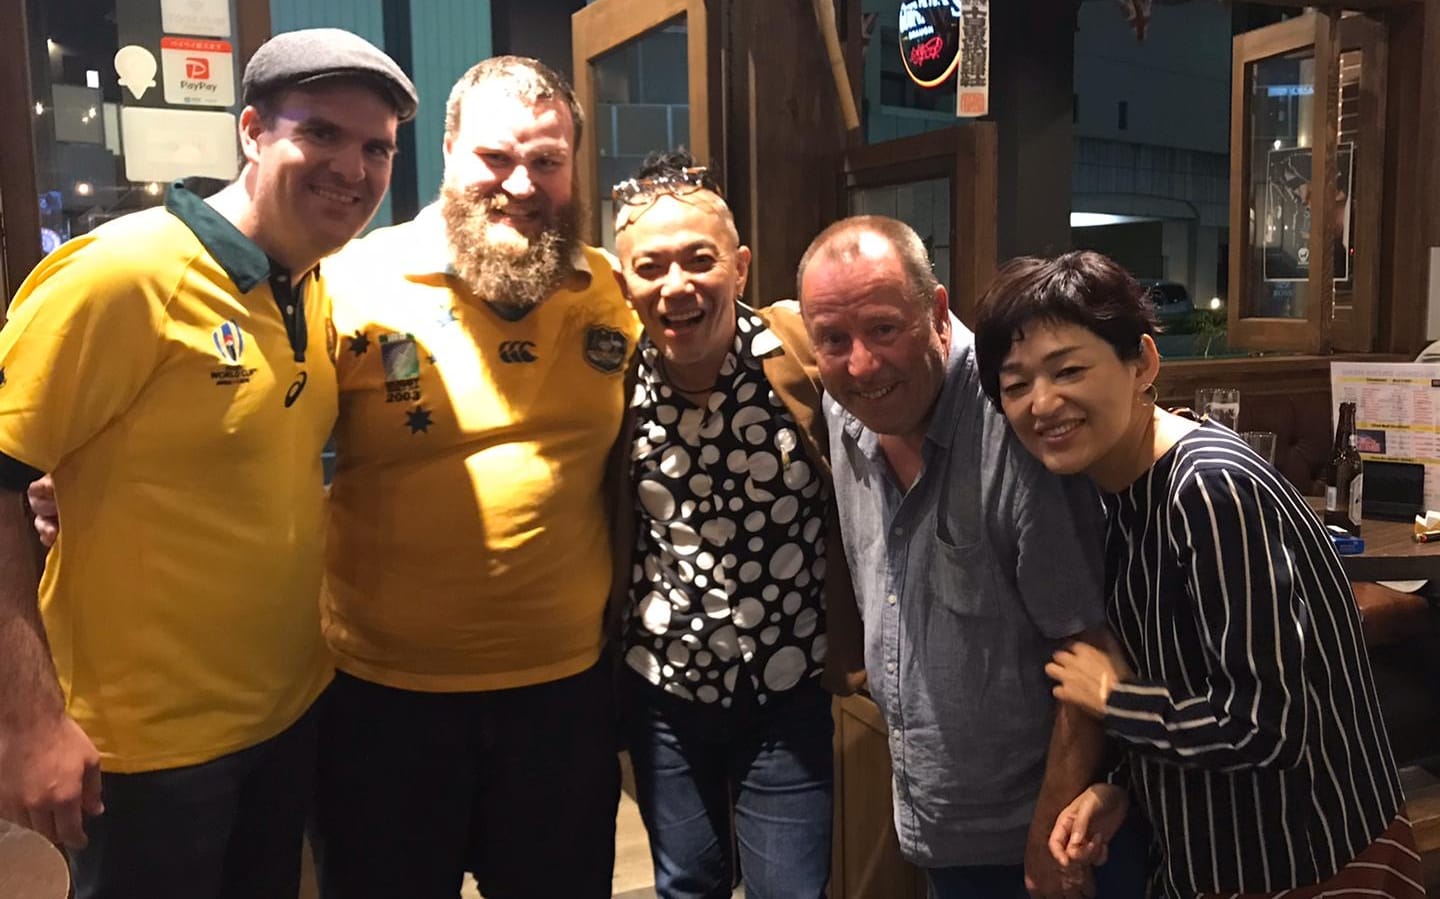 Dutch rugby fan Pierre Janssen (L) makes some new friends in Japan during the World Cup.